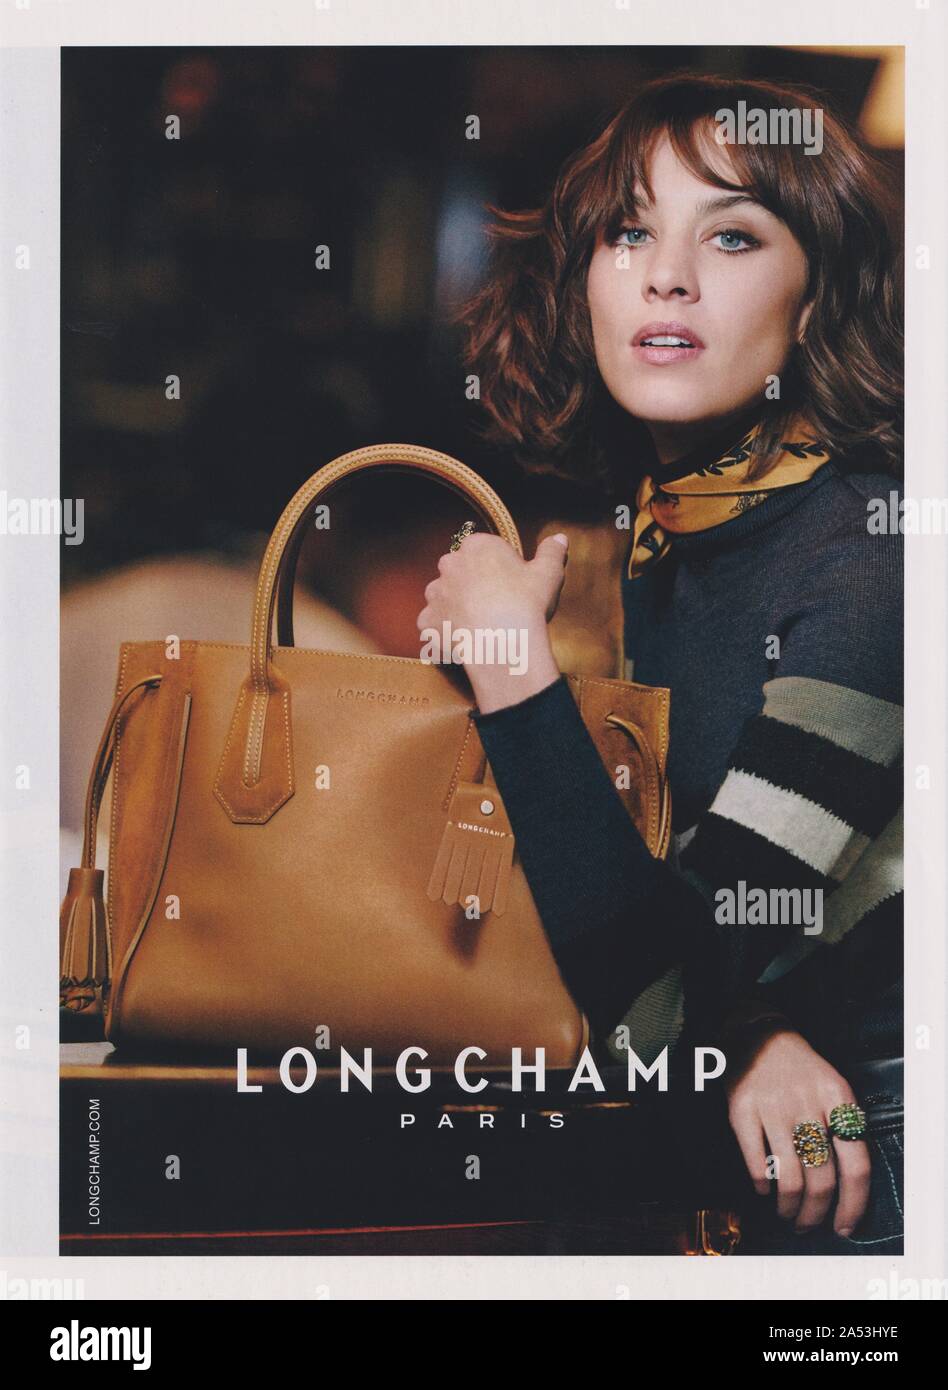 Longchamp Projects  Photos, videos, logos, illustrations and